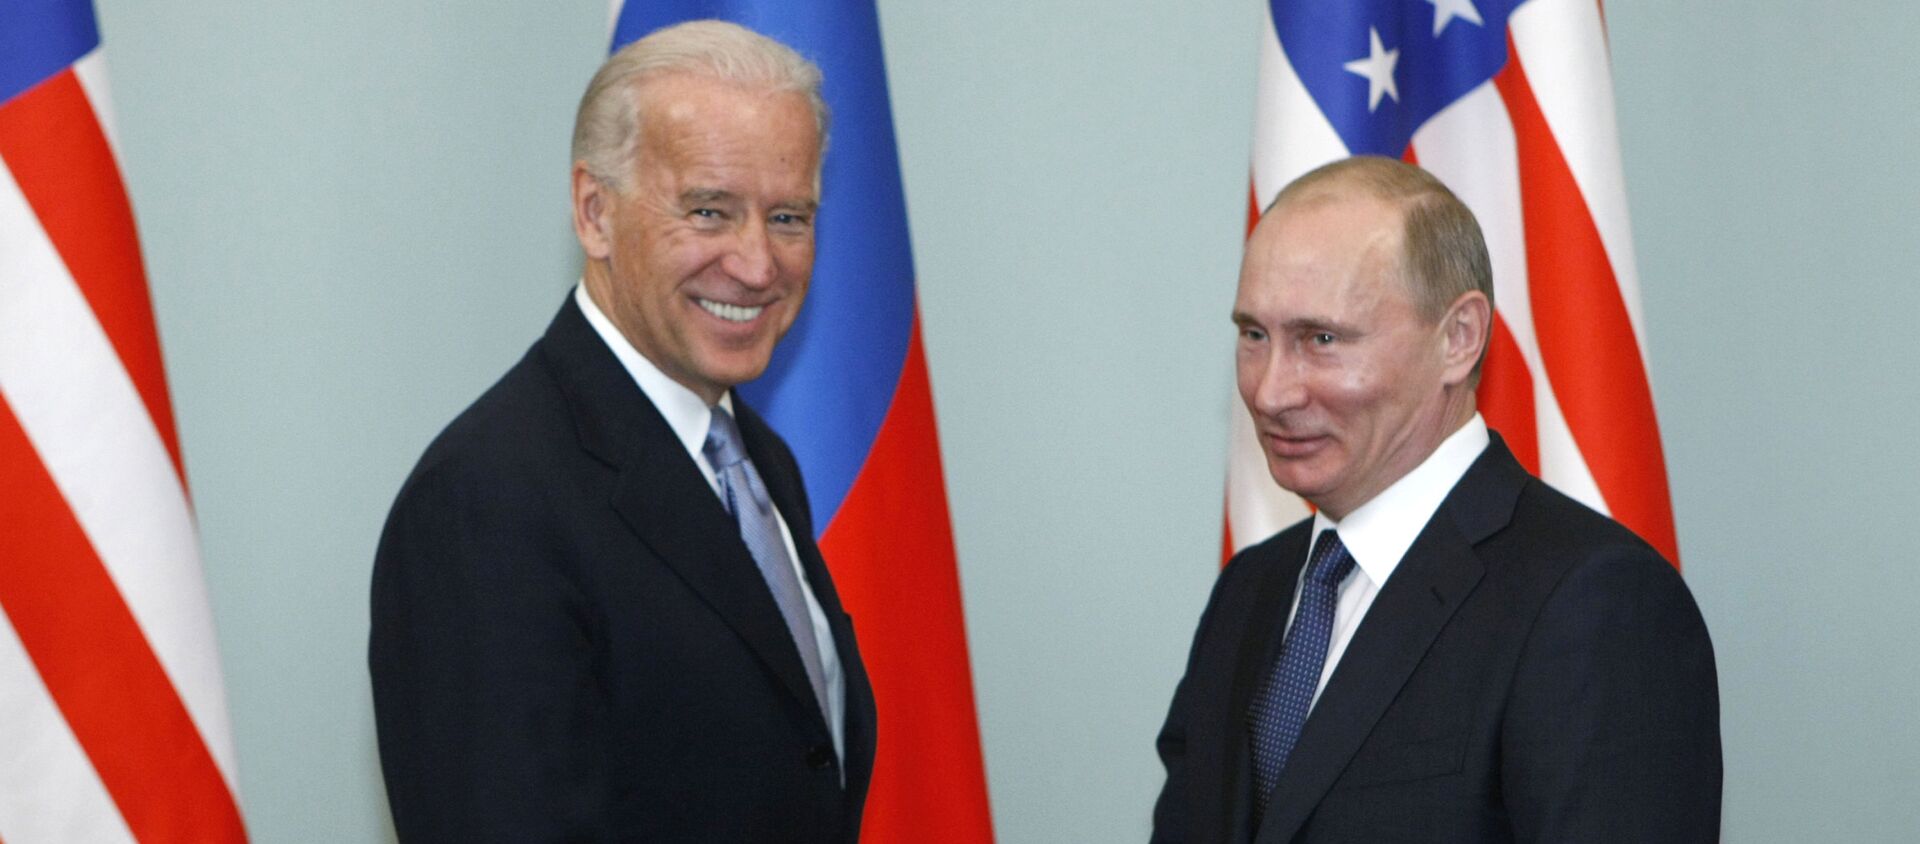 In this March 10, 2011, file photo, Vice President of the United States Joe Biden, left, shakes hands with Russian Prime Minister Vladimir Putin in Moscow, Russia. - Sputnik International, 1920, 25.05.2021